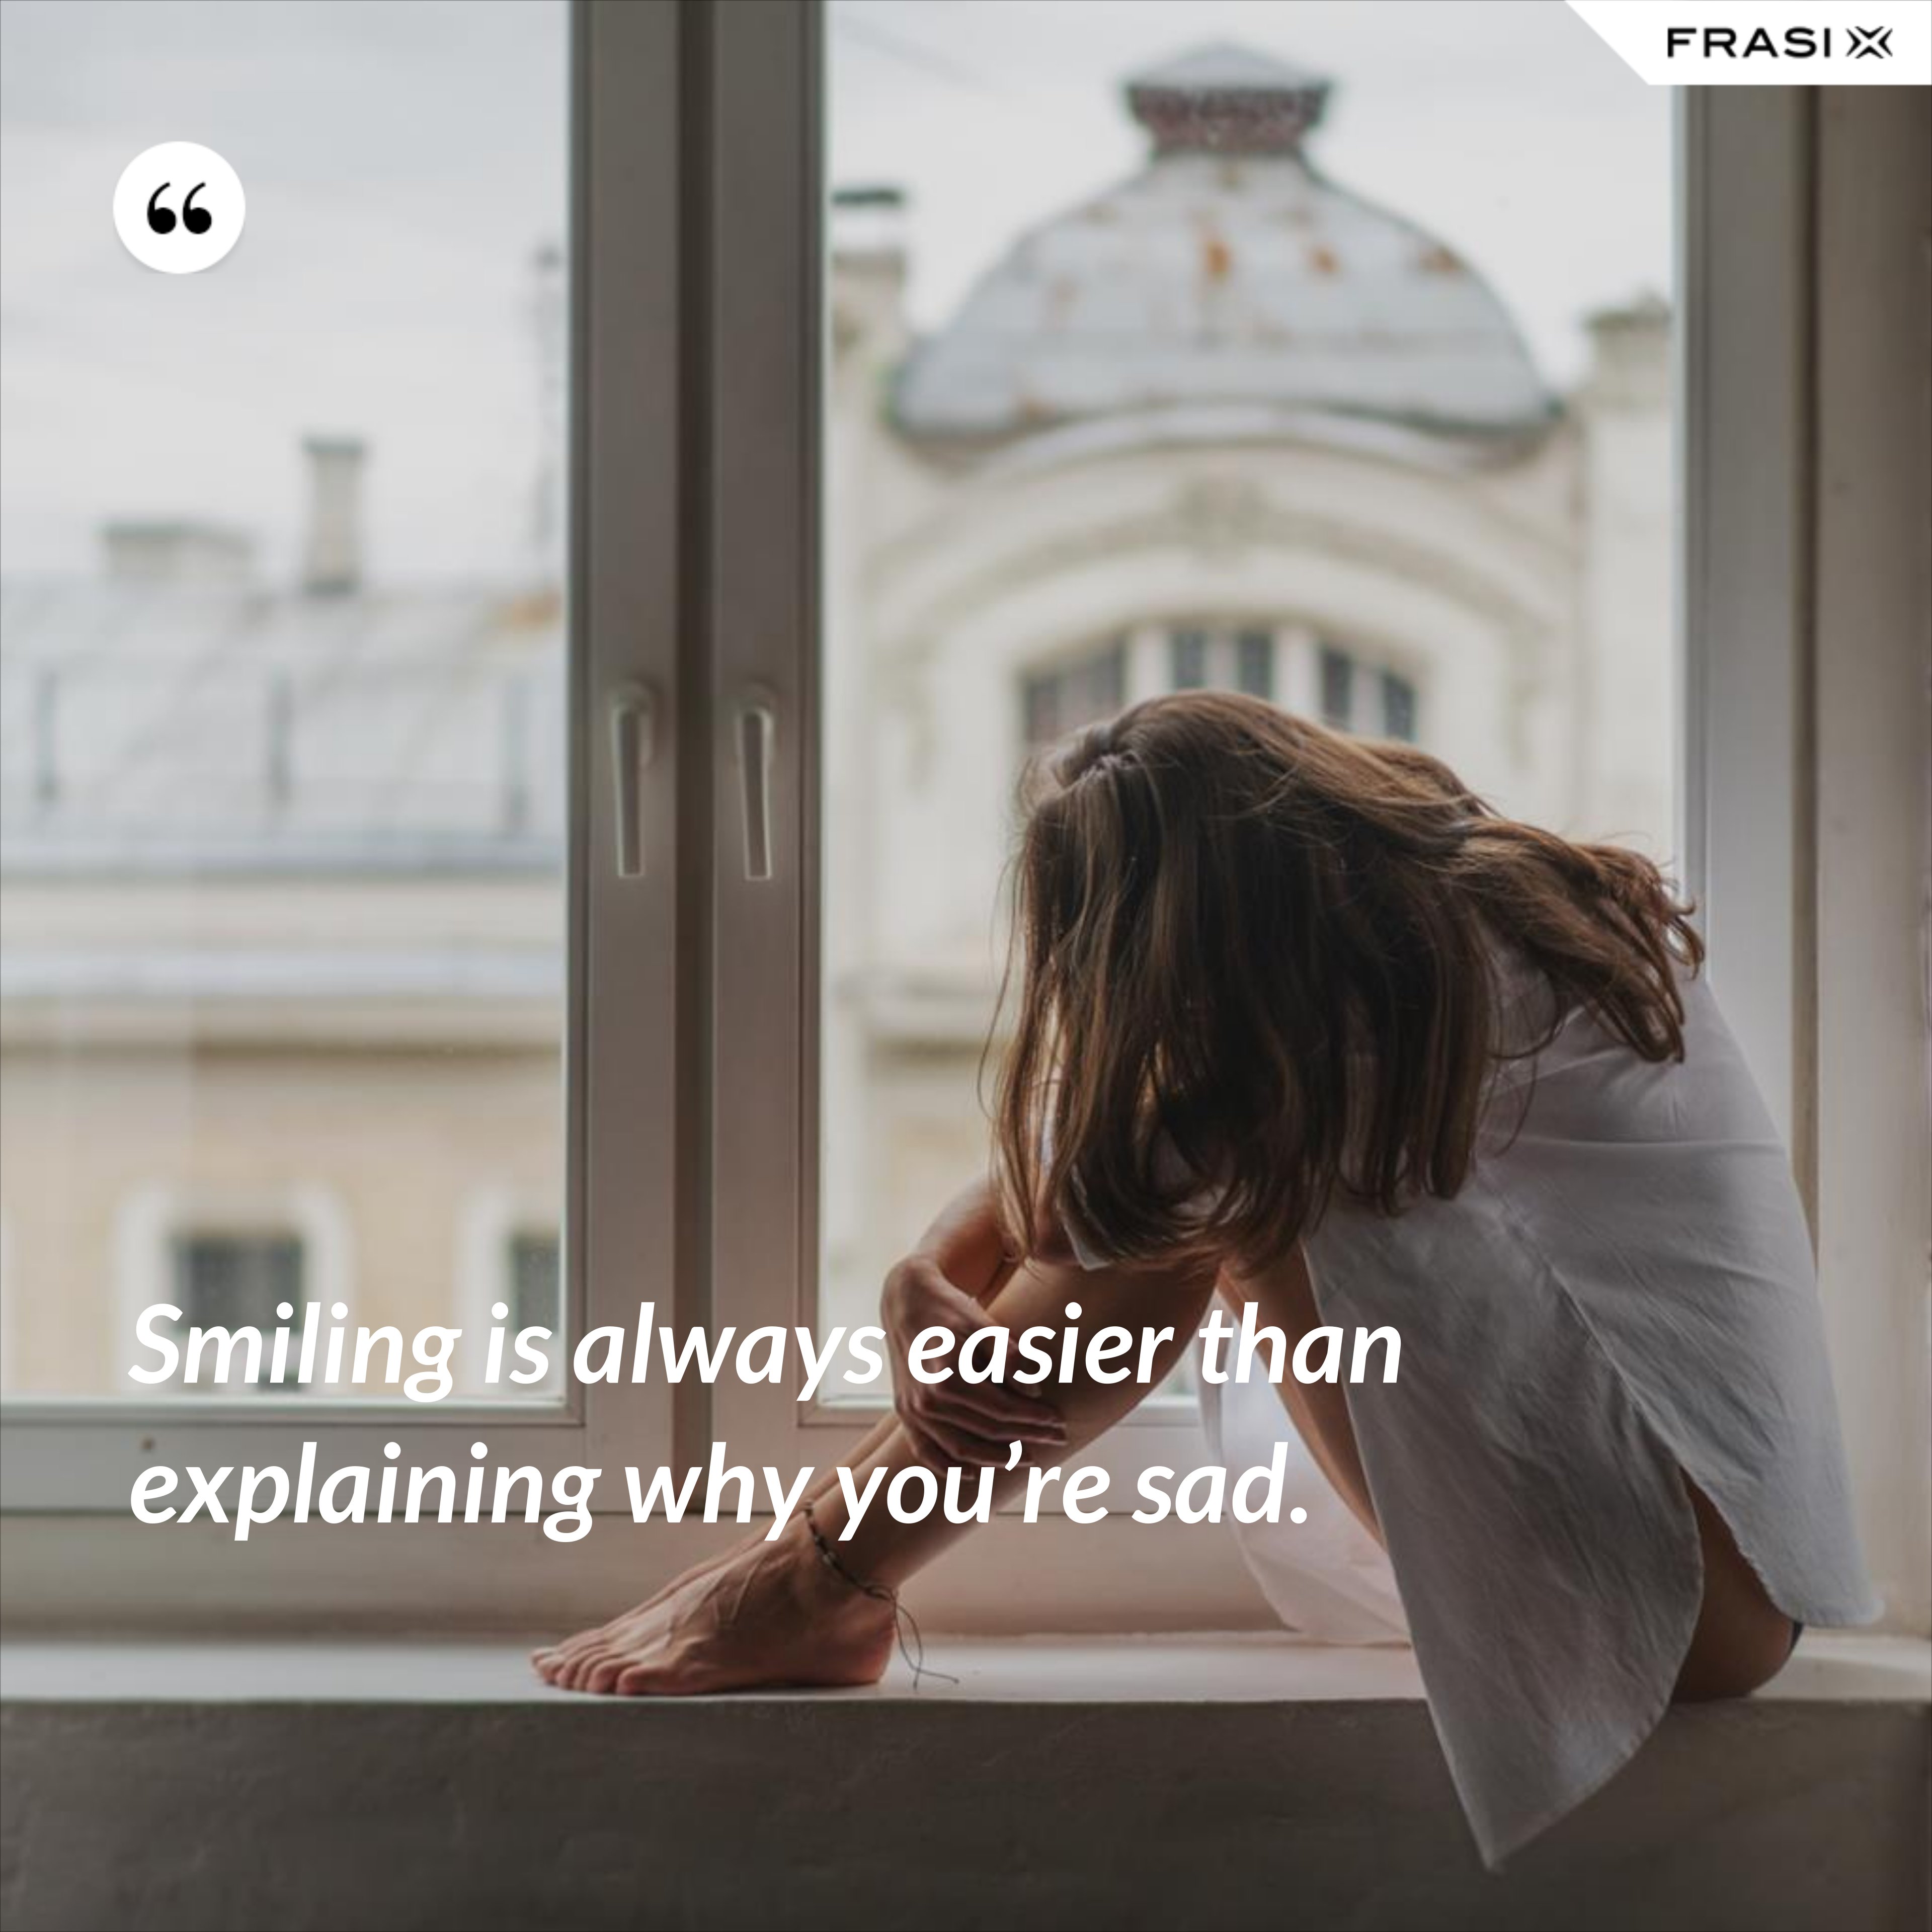 Smiling is always easier than explaining why you’re sad. - Anonimo